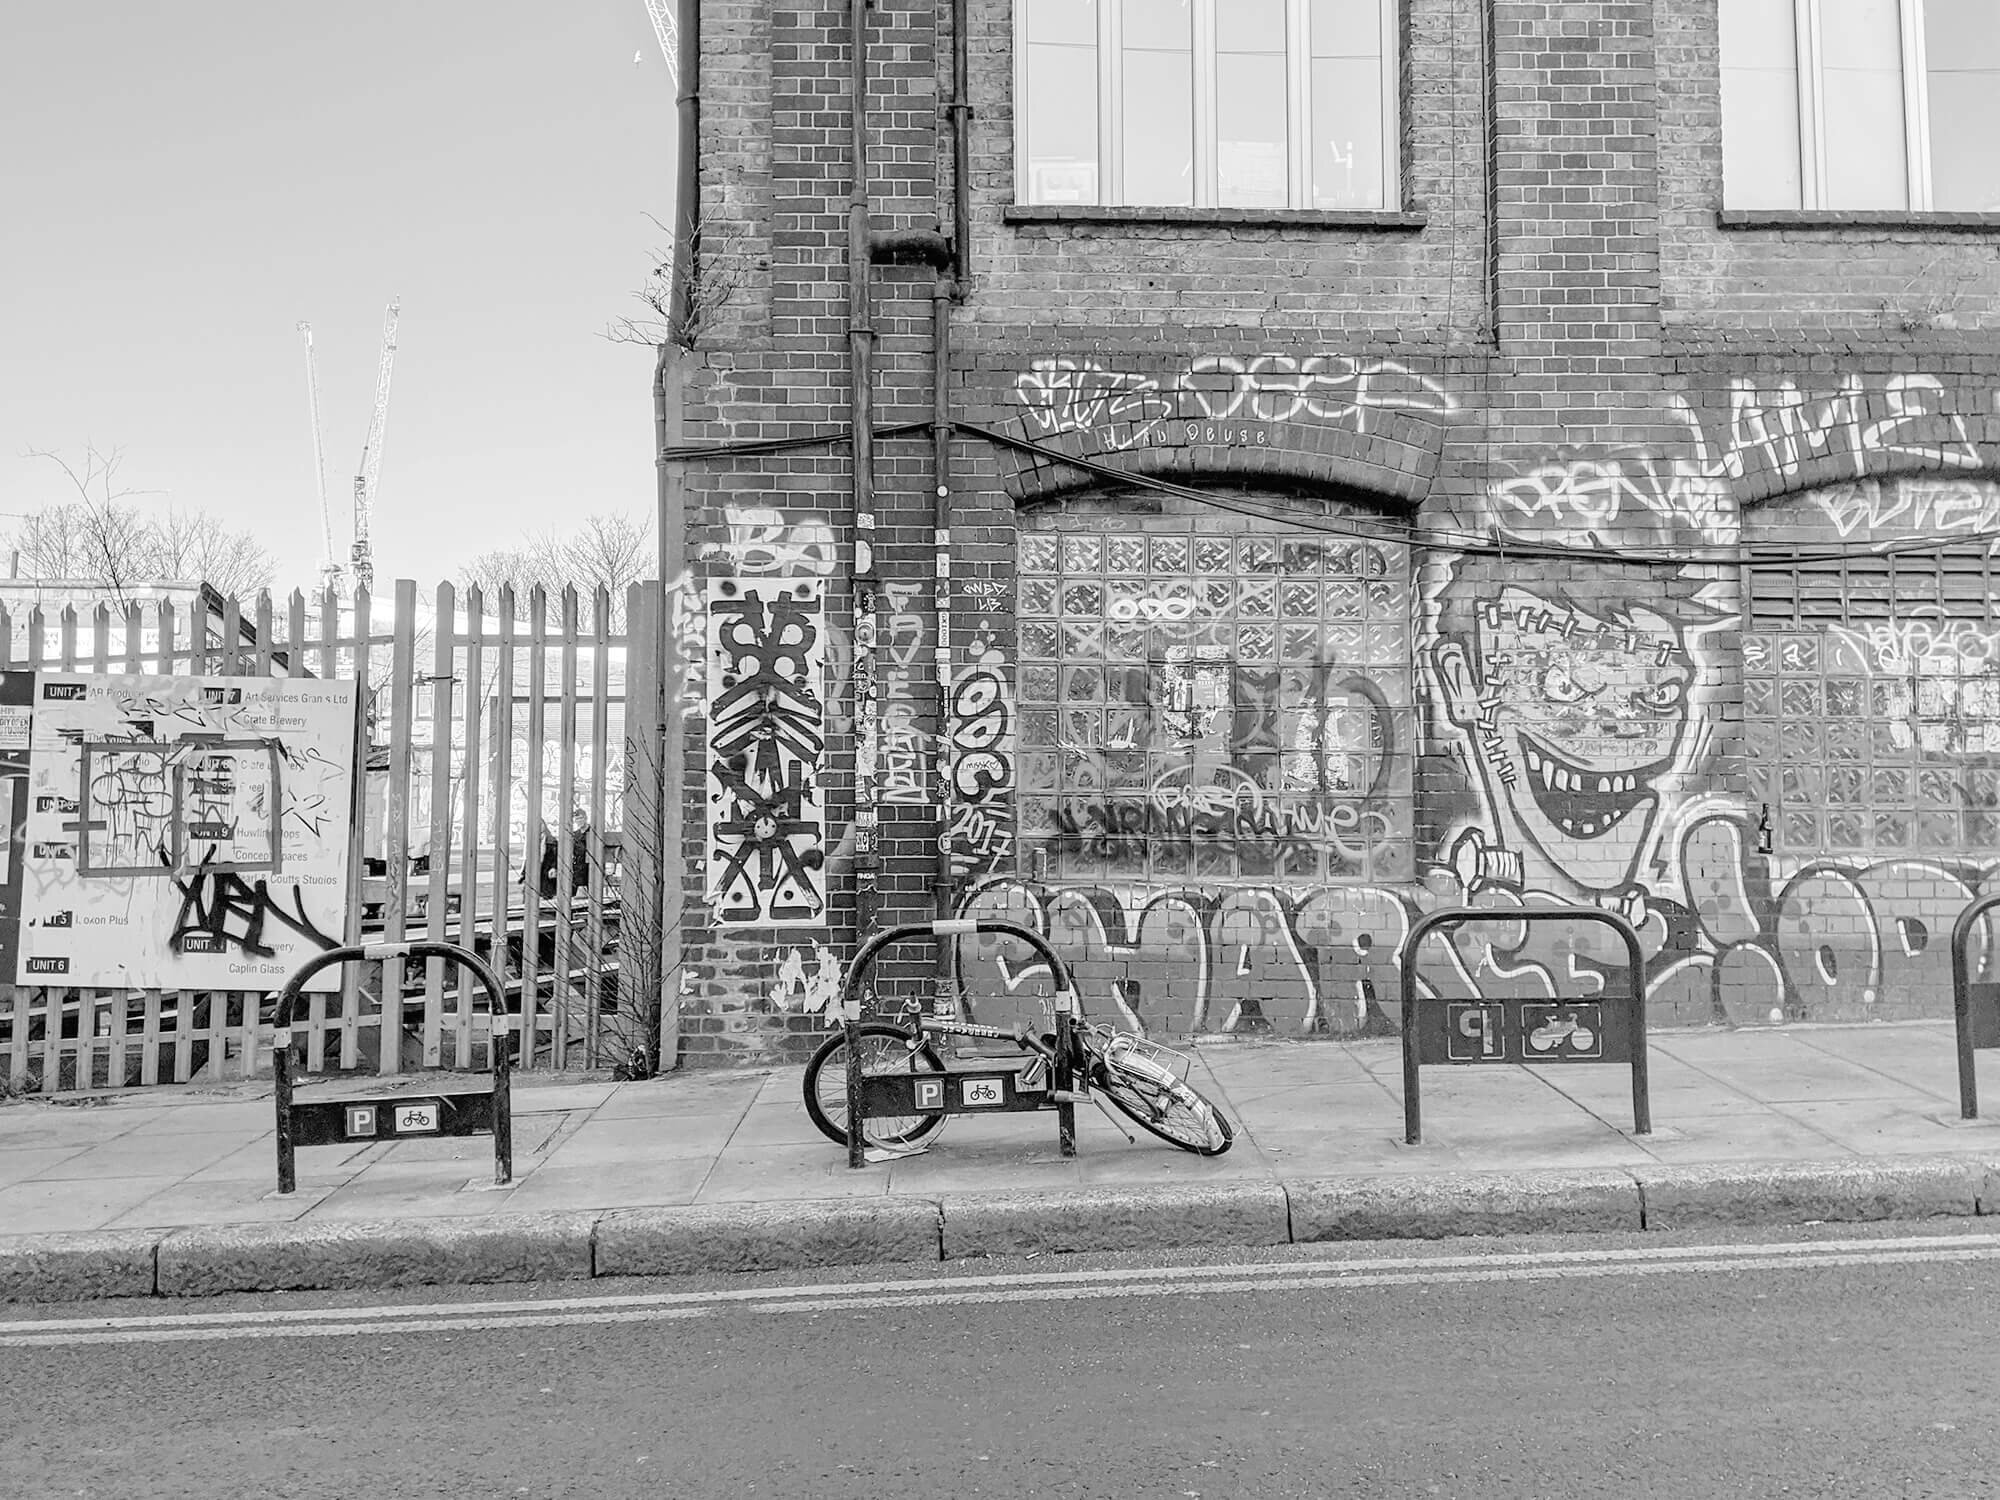 Black and white. Bicycle leaning on frame, in front of graffitied building.